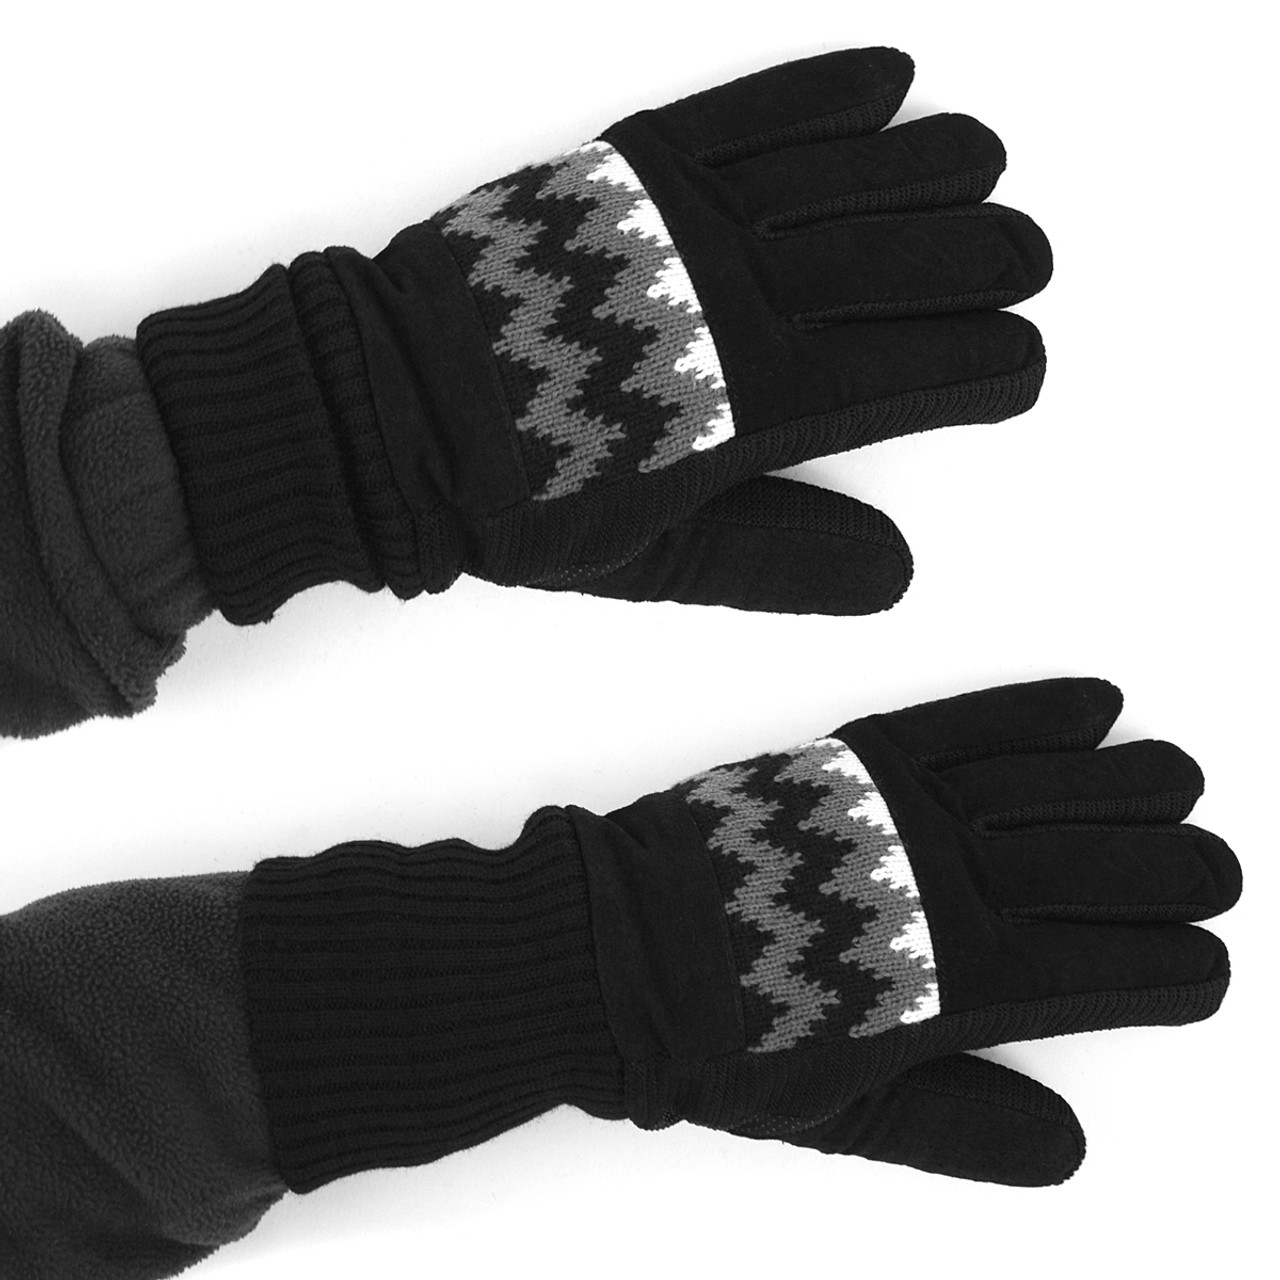 Men's Genuine Leather Non-Slip Grip Winter Gloves with Soft Acrylic Lining  MWG02